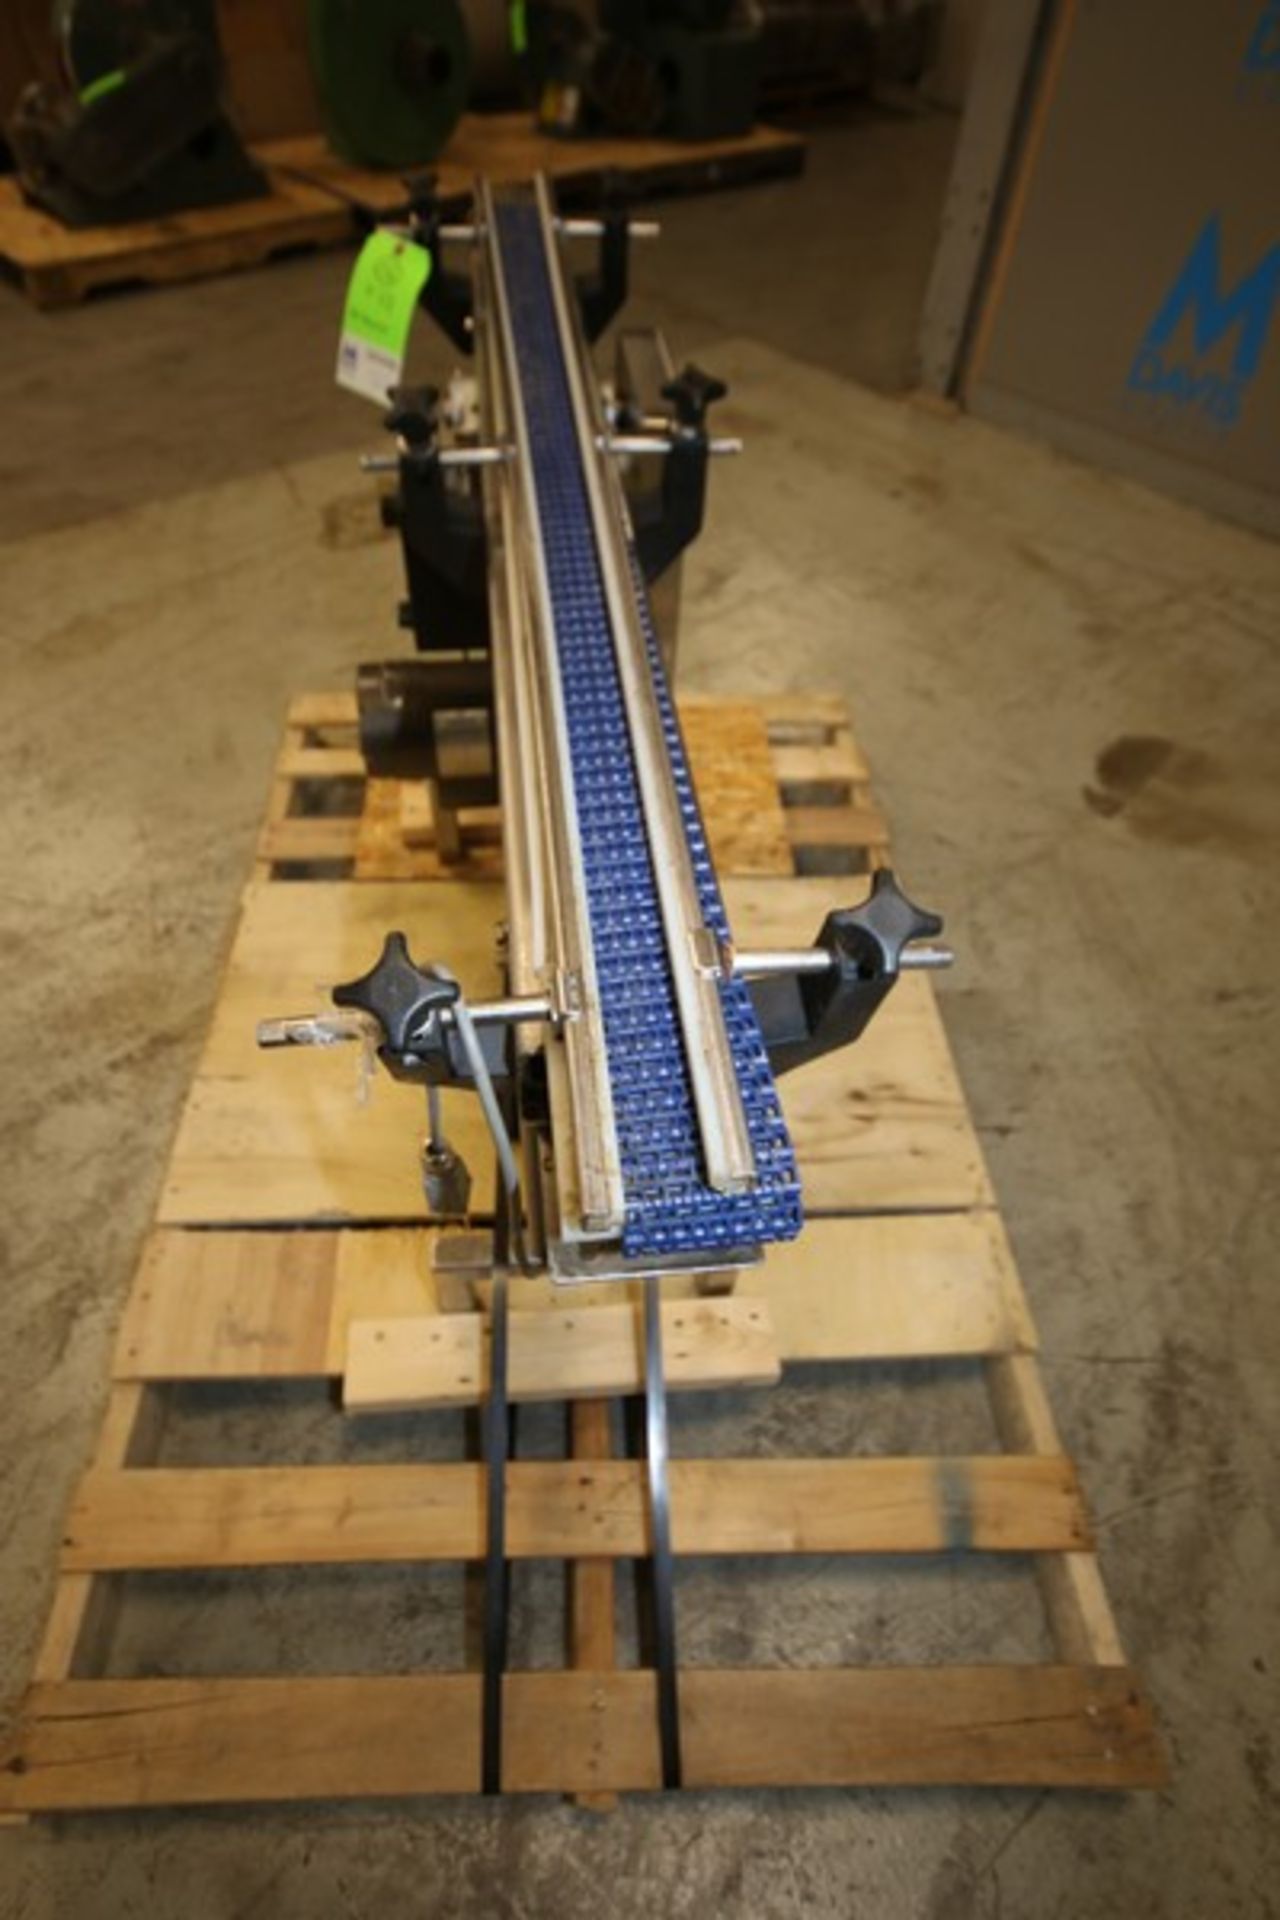 55" L x 31" H S/S Product Conveyor Section with 3" W Intralox Type Plastic Belt, 1/4 hp Drive - Image 3 of 4